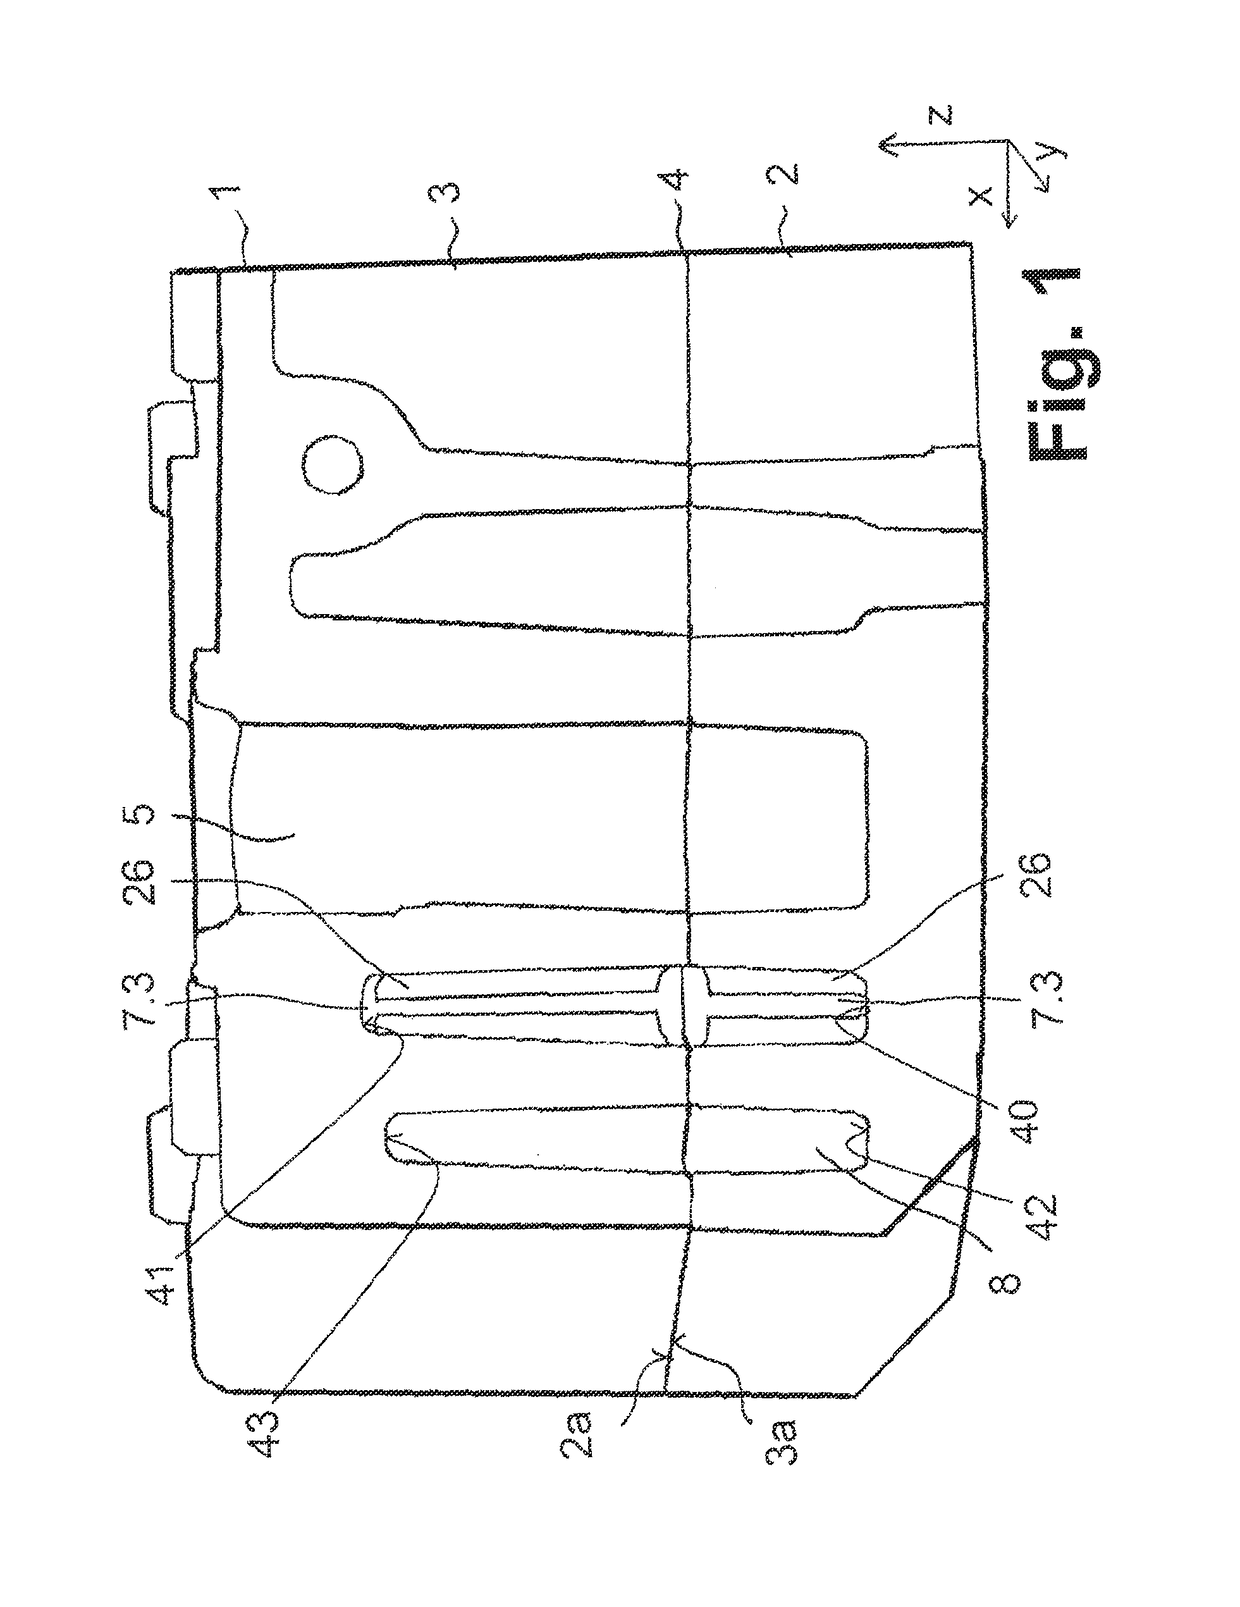 Compressor for a vehicle air supply system